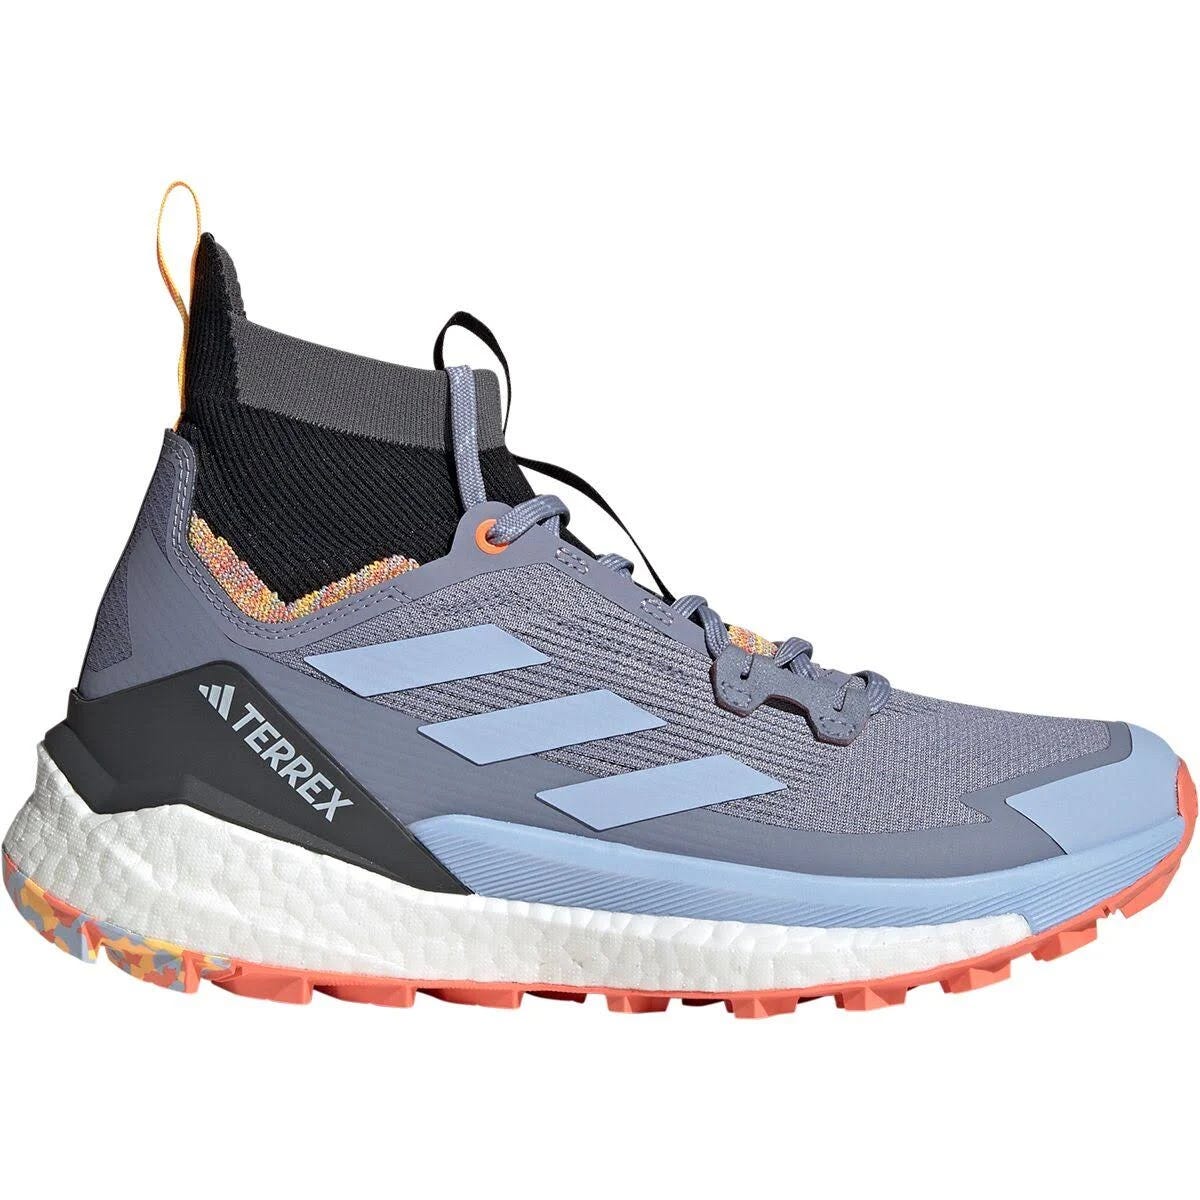 Adidas Terrex Free Hiker 2.0: Eco-Friendly Hiking Shoes with Boost Midsole and Breathable Upper | Image